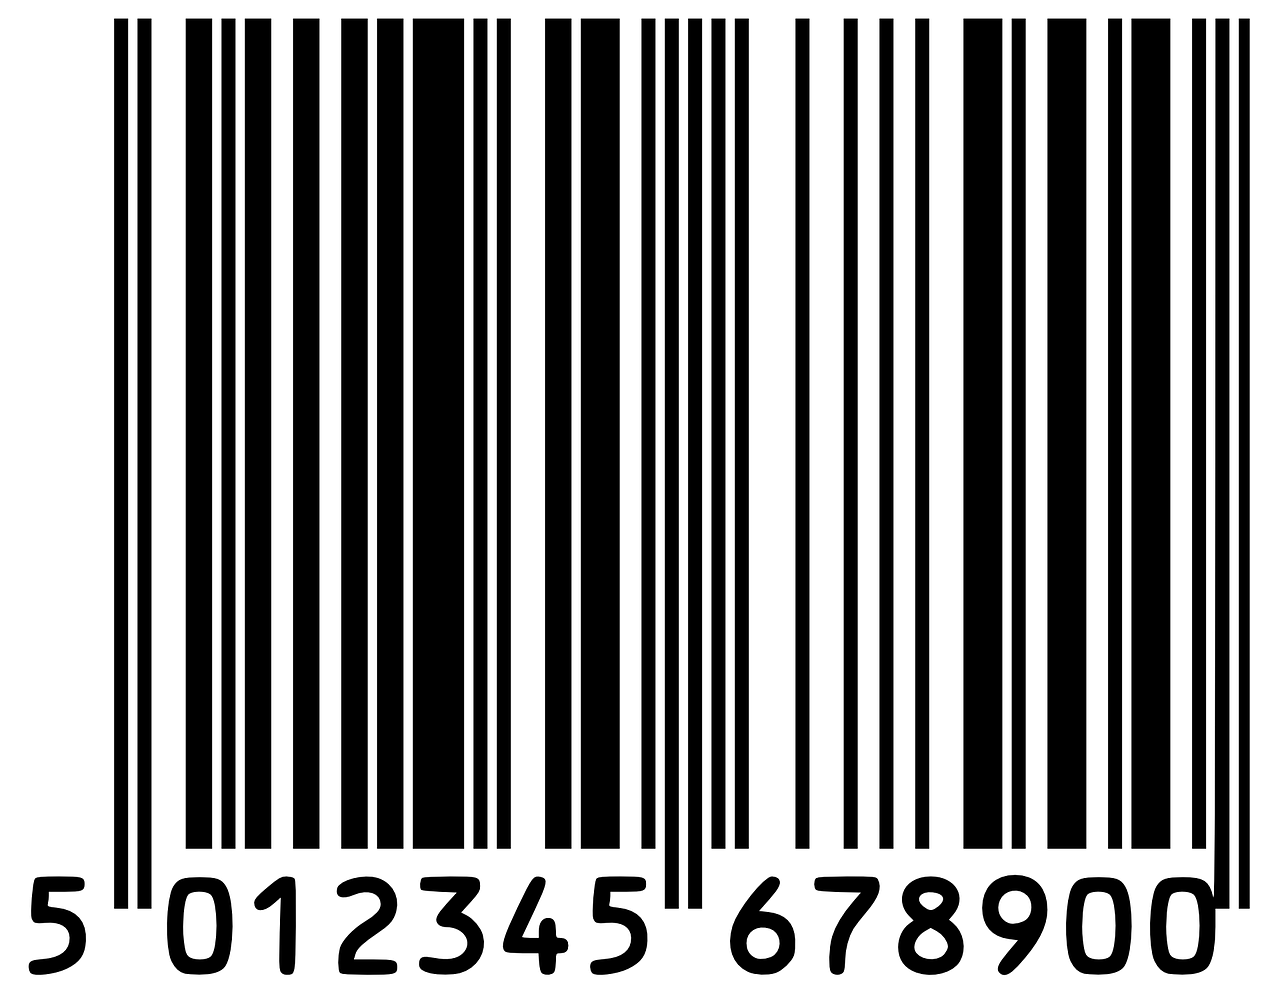 What Is Barcoding In Stocks 